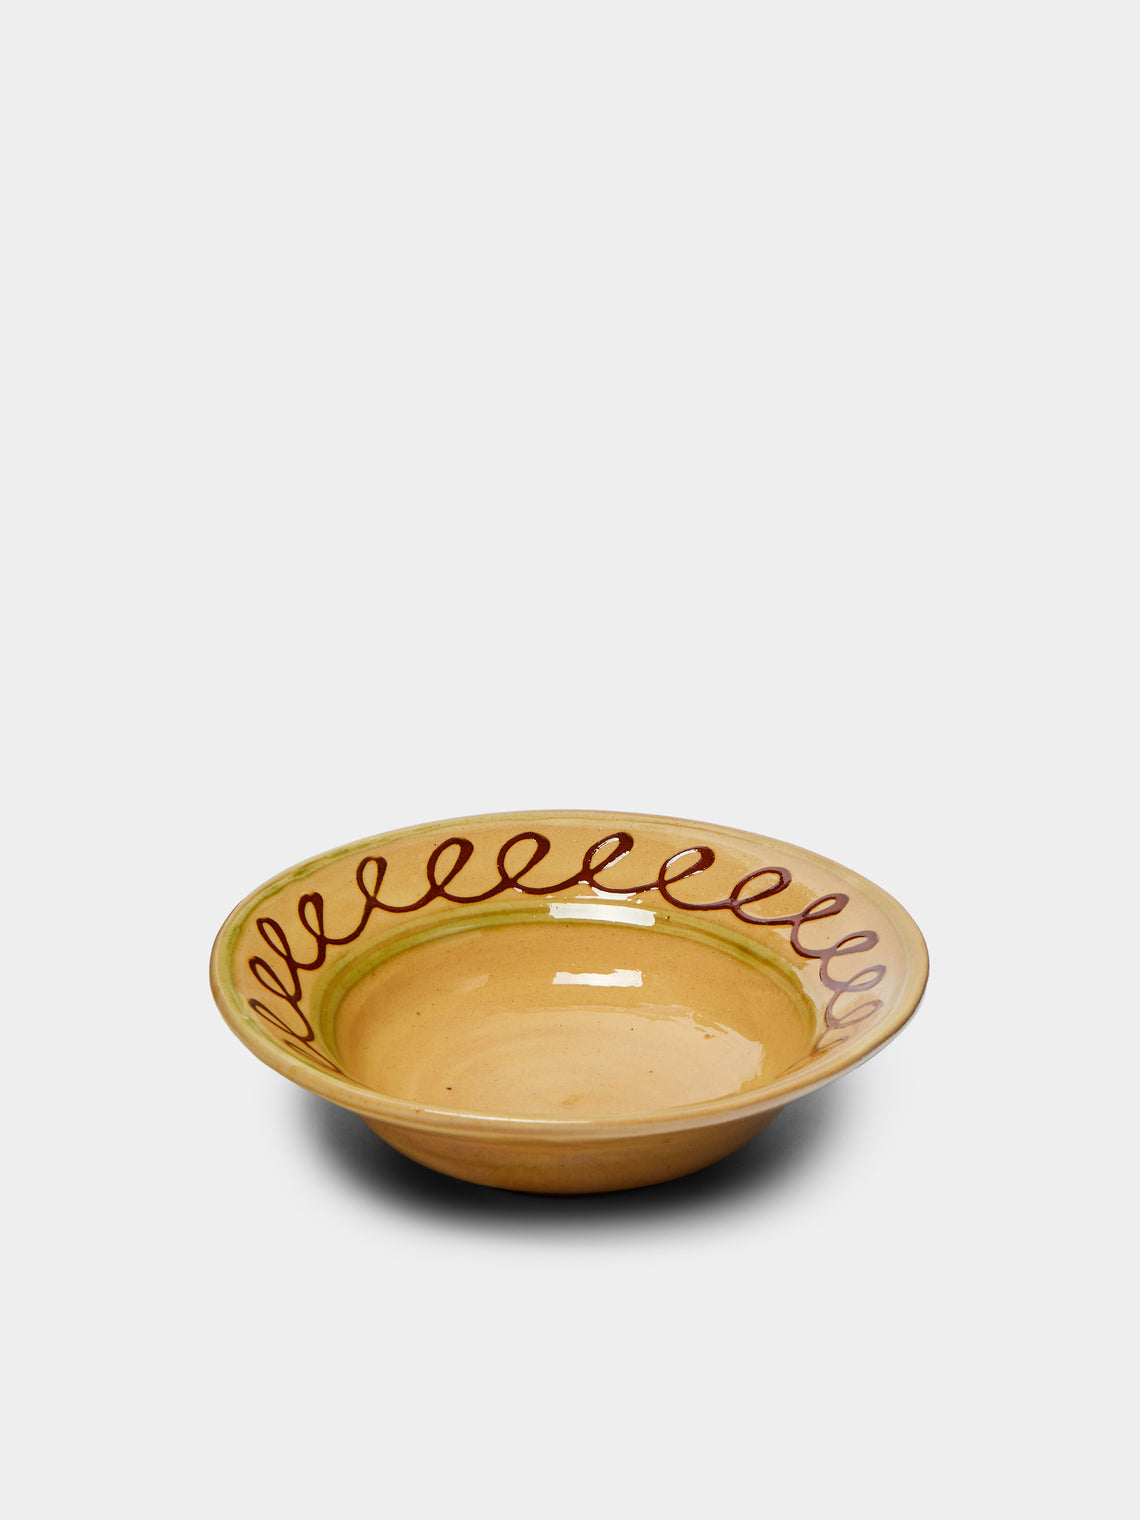 Poterie de Cliousclat - Hand-Painted Slipware Small Bowls (Set of 4) -  - ABASK - 